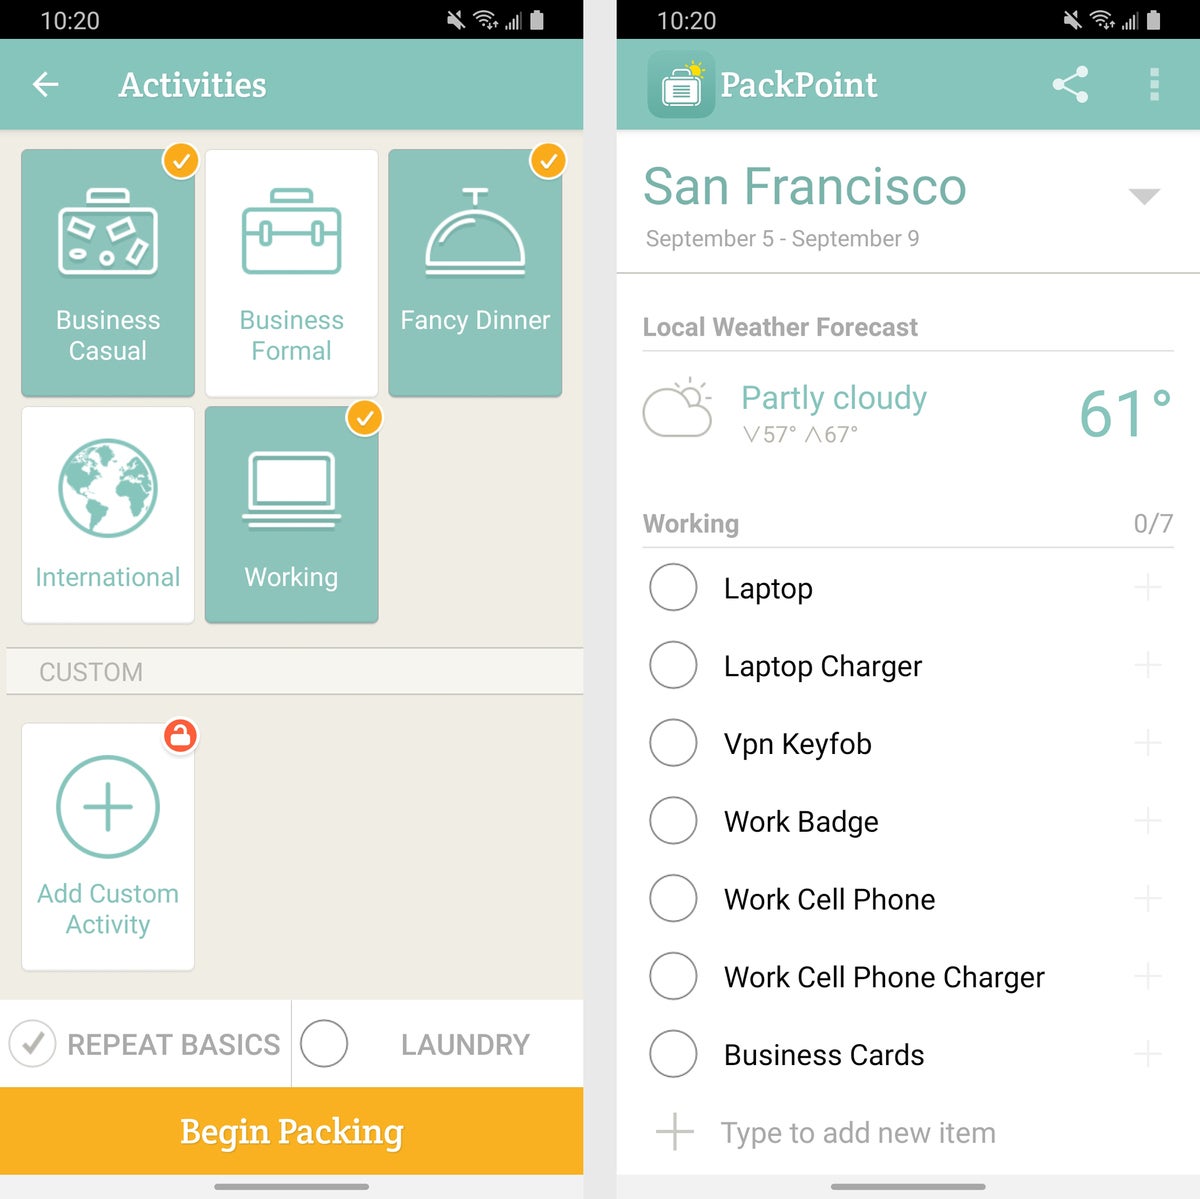 android travel apps packpoint 2021